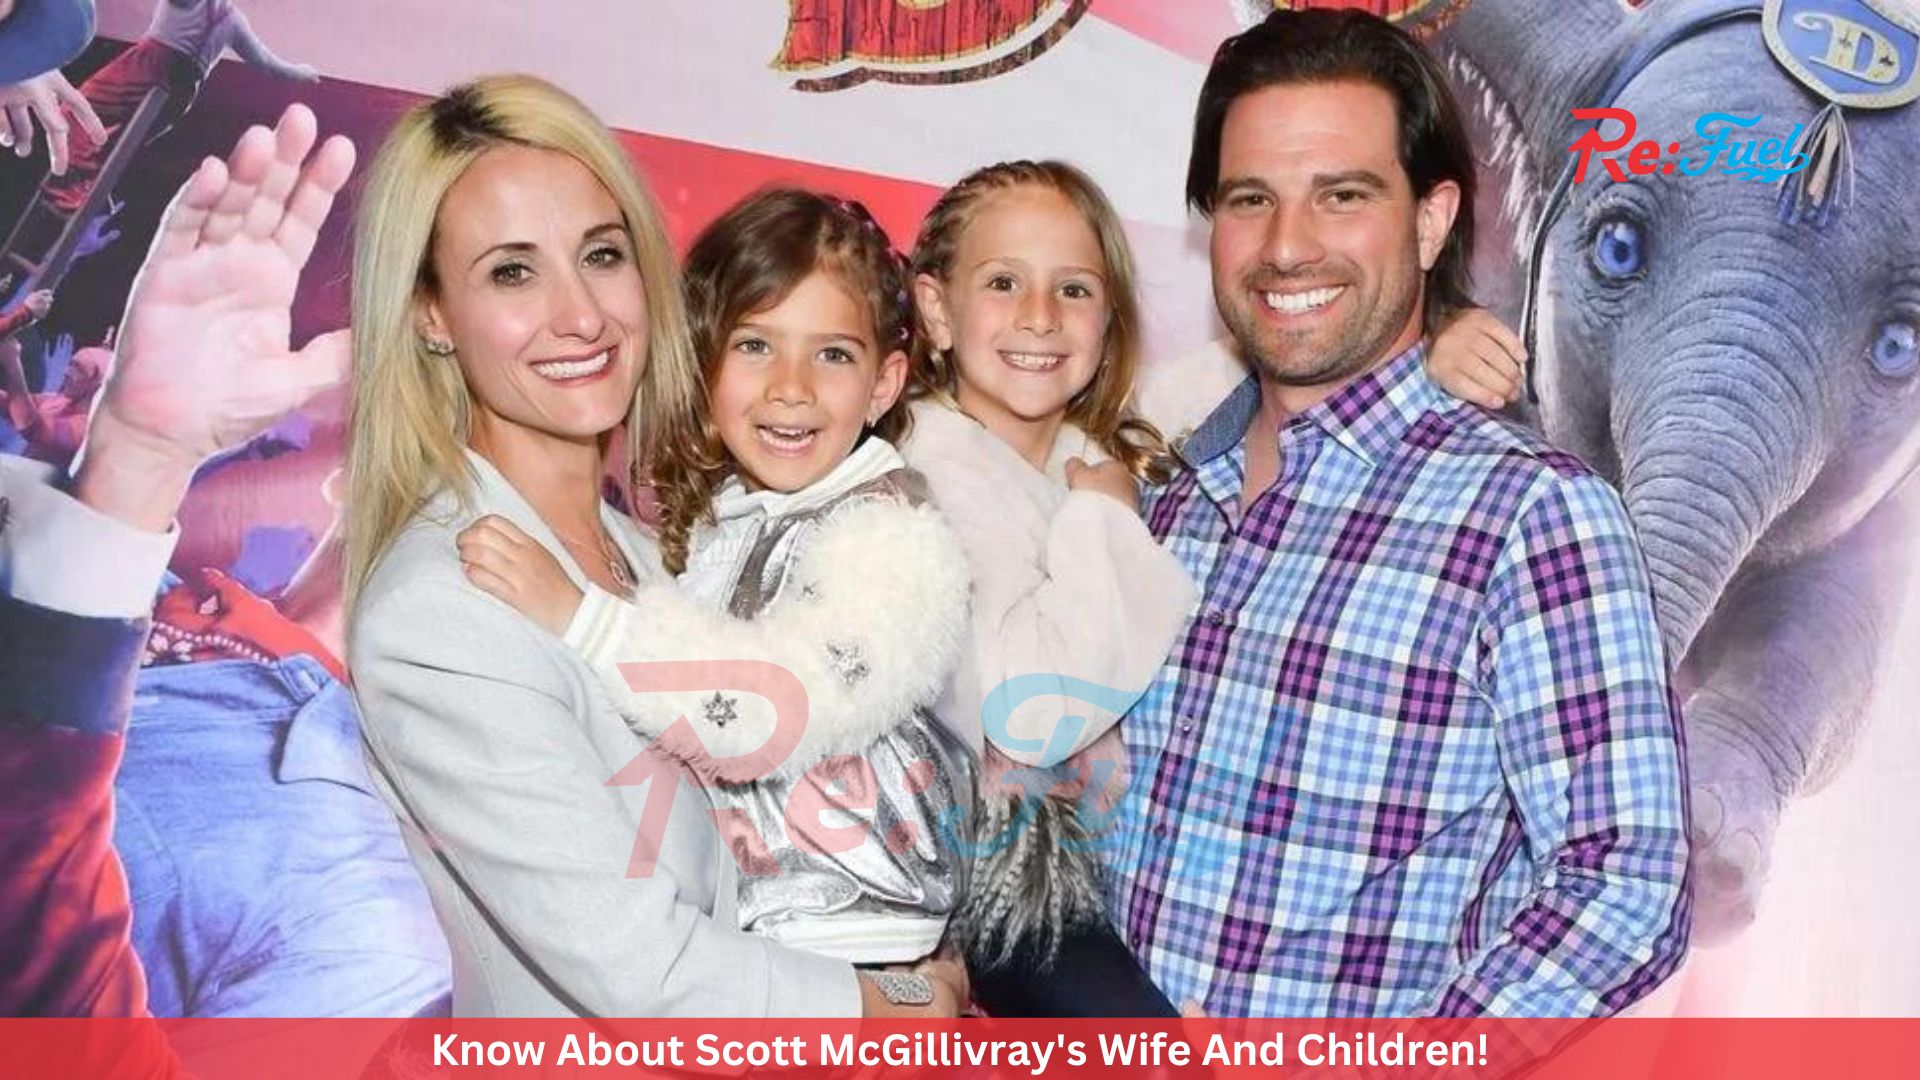 Know About Scott McGillivray's Wife And Children!